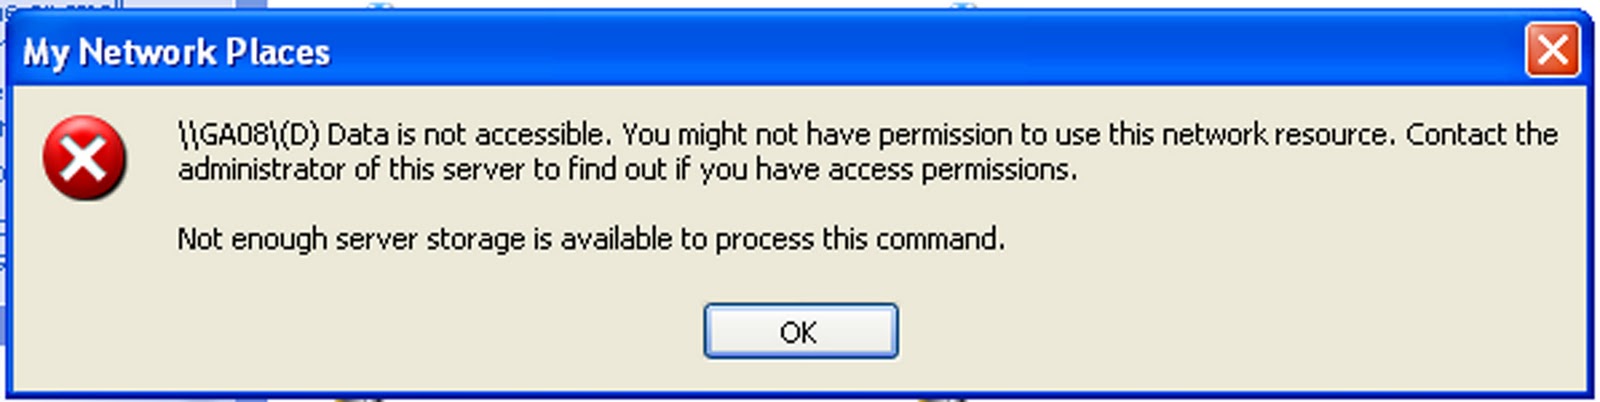 Unable to detect Graphics environment. You do not have permission to install software. You do not have permission to Run this Command (you need the Music.leave permission).